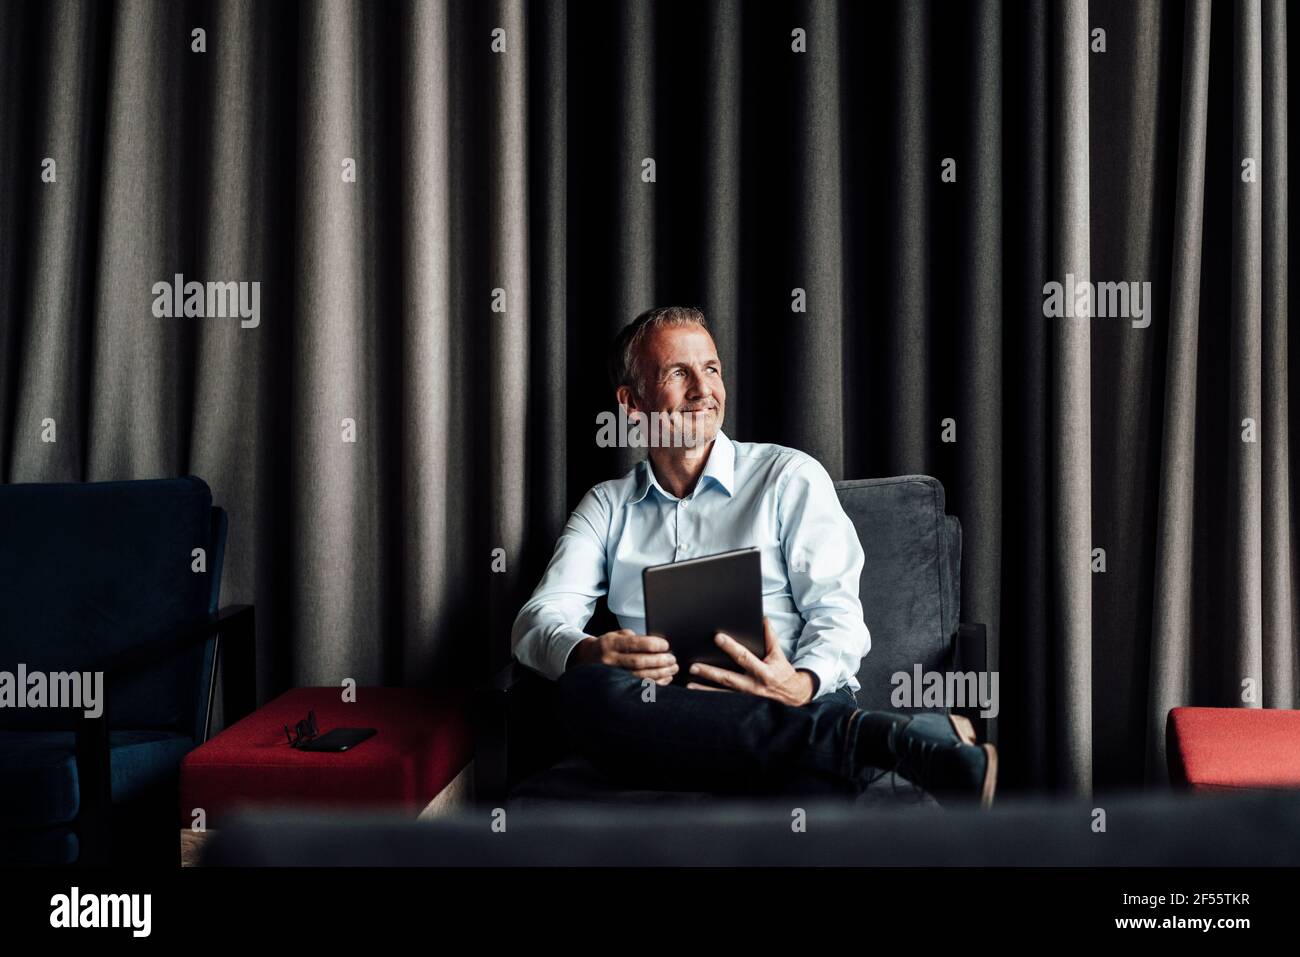 Smiling businessman with legs crossed at knee holding digital tablet on armchair in office cafeteria Stock Photo